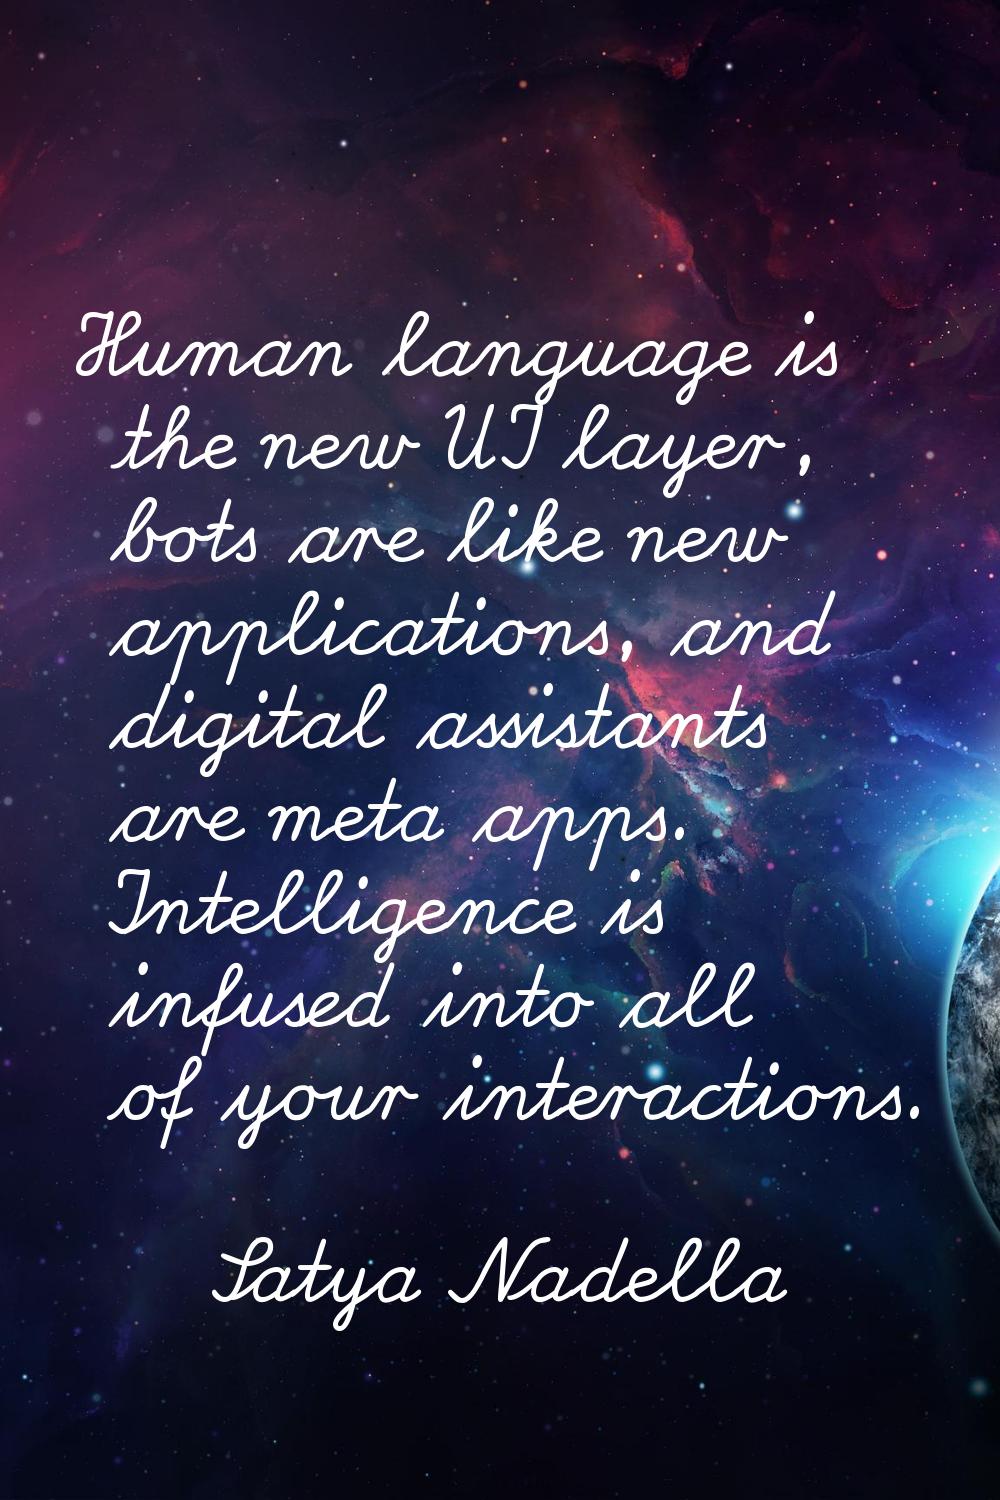 Human language is the new UI layer, bots are like new applications, and digital assistants are meta